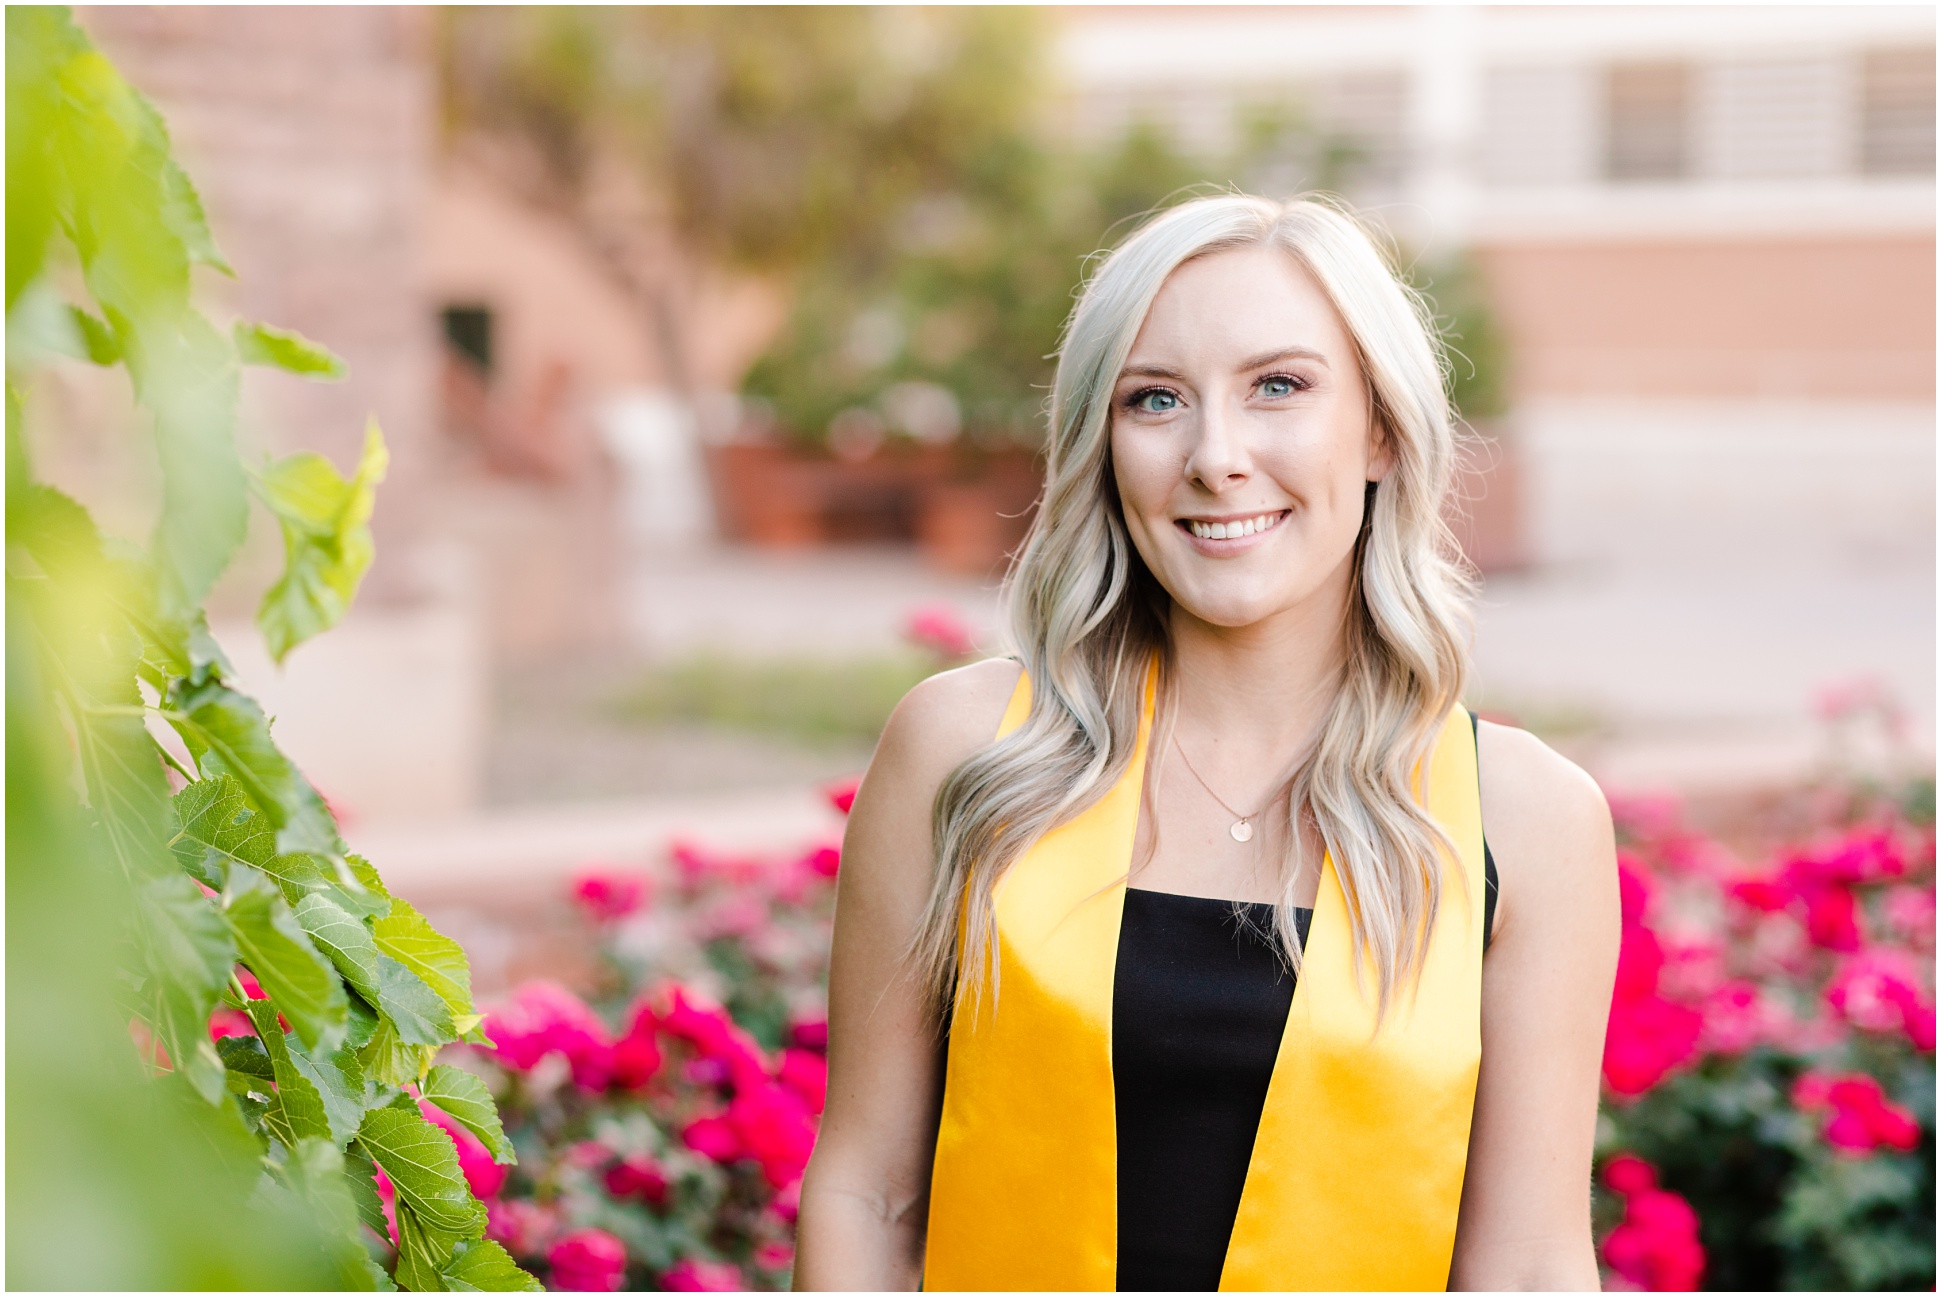 Kaitlyn Schares standing next to greenery wearing her stole at Old Main on ASU Campus